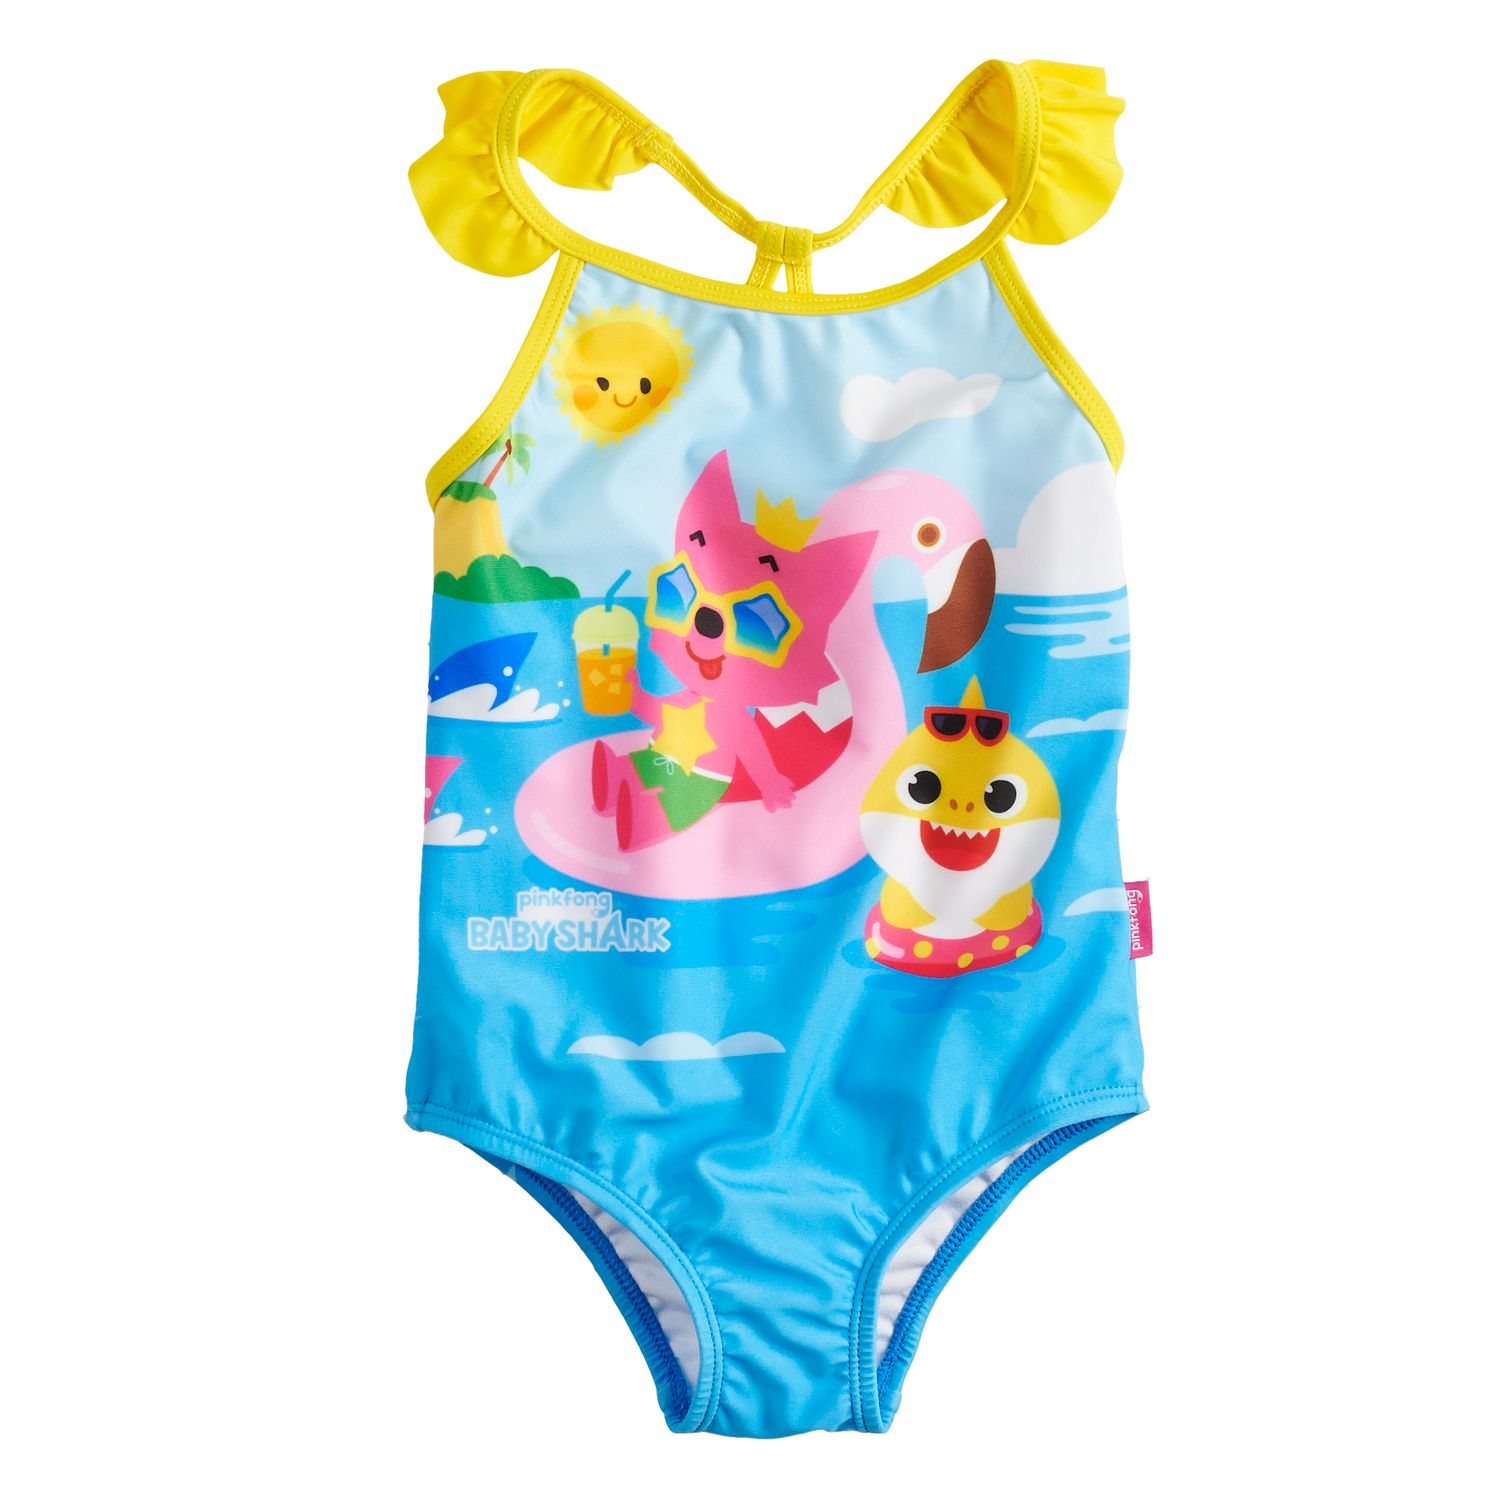 Pinkfong Girls Baby Shark Swimsuit Pink Size 6 